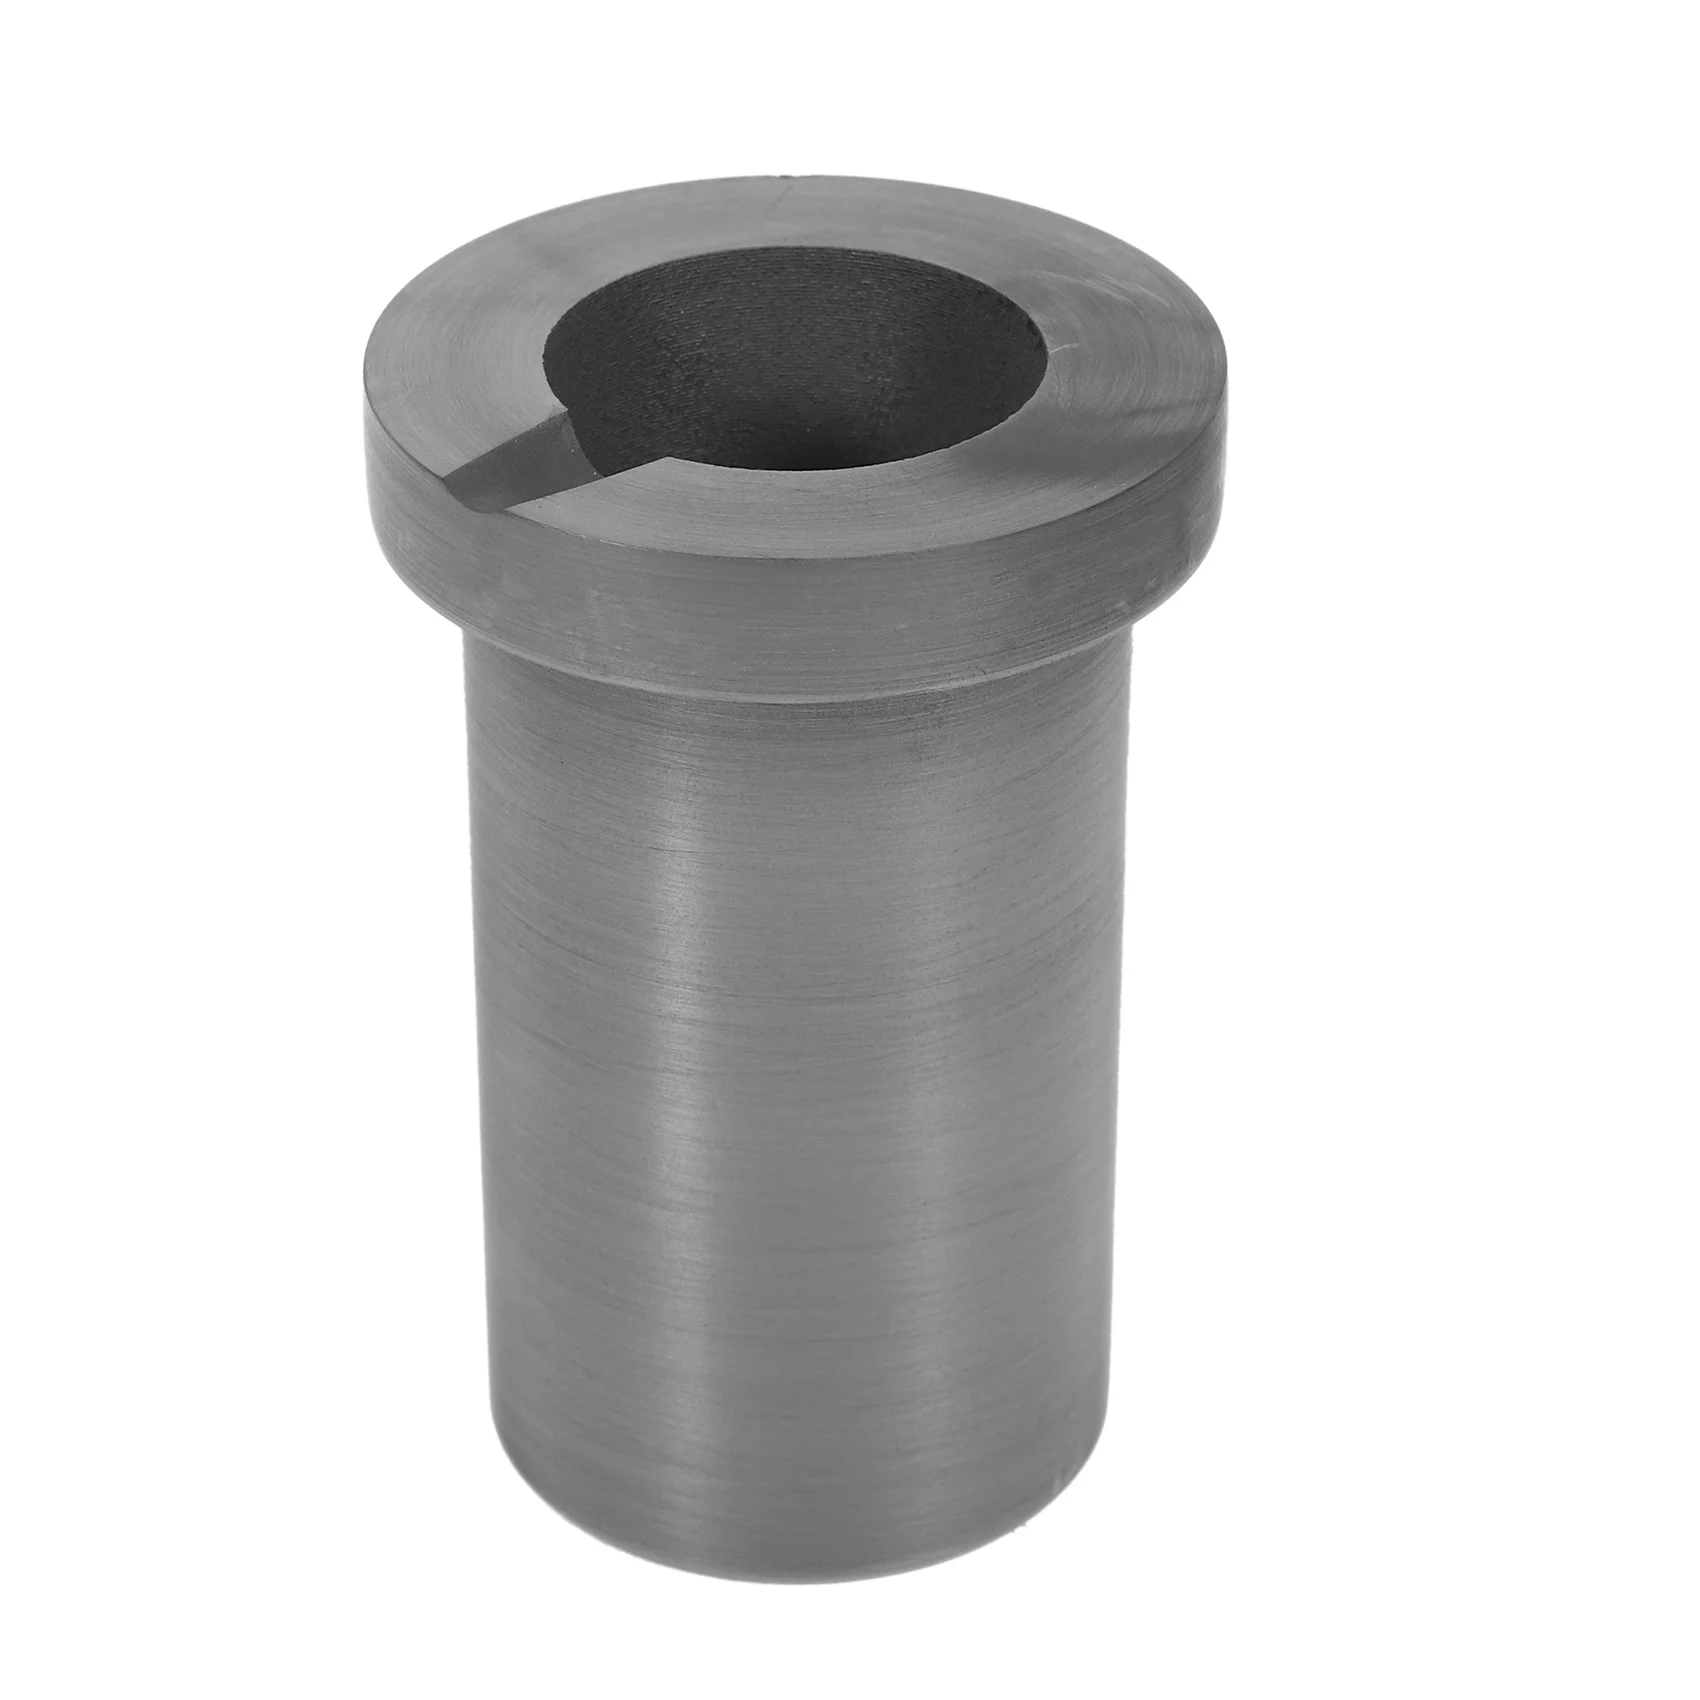 

High-Purity Melting 1Kg Graphite Crucible Good Heat Transfer Performance For High-Temperature Gold And Silver Metal Smelting